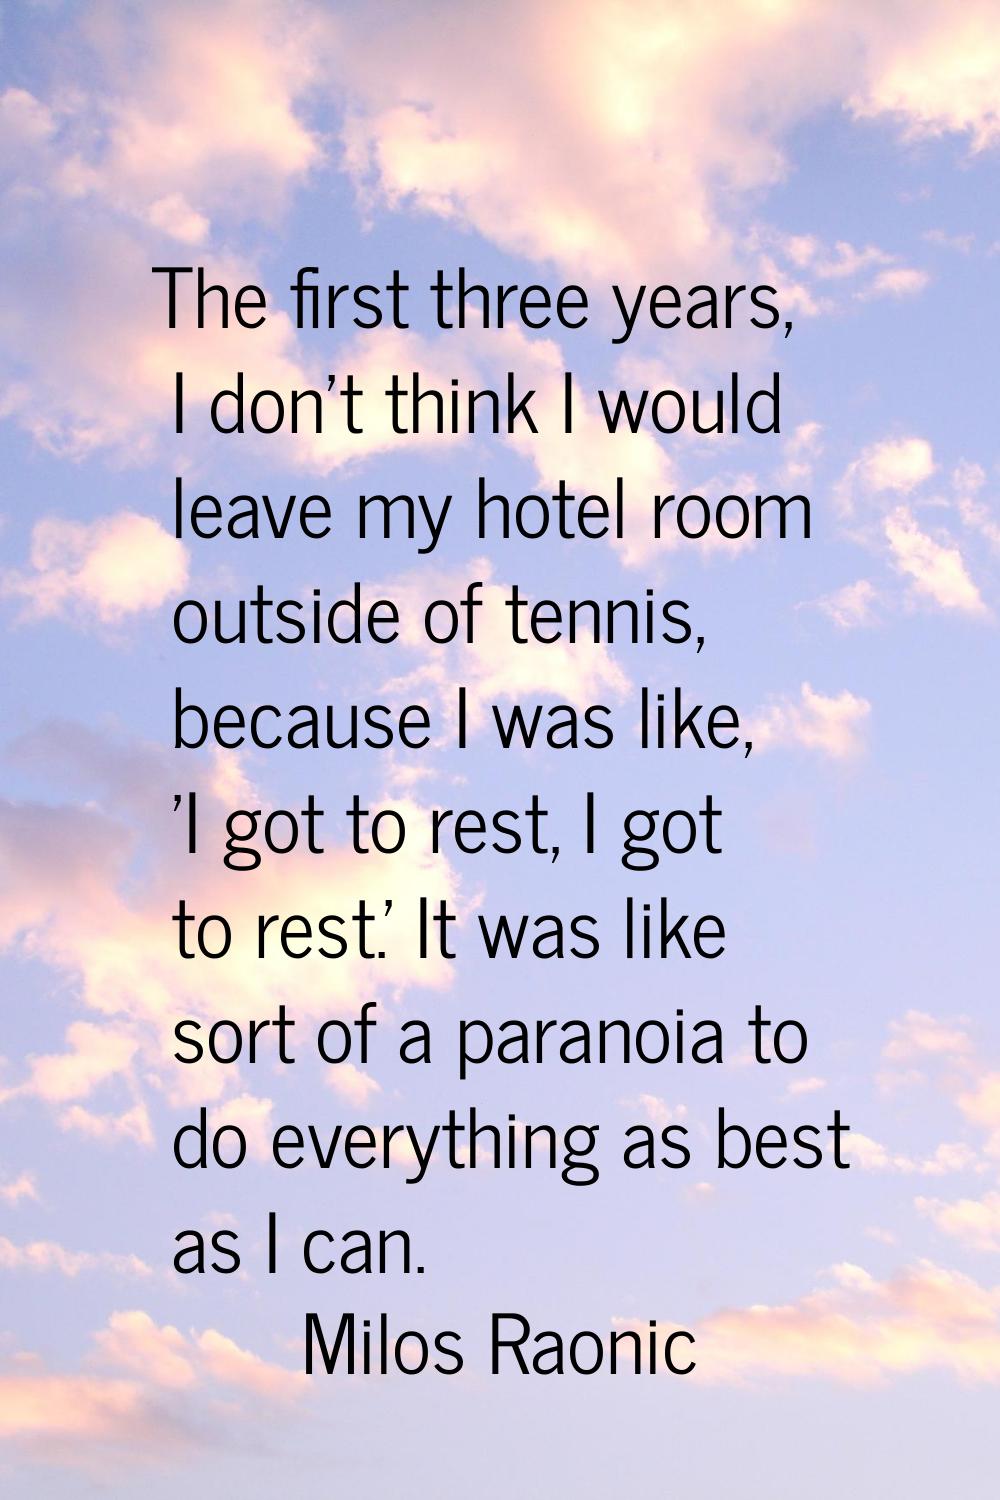 The first three years, I don't think I would leave my hotel room outside of tennis, because I was l